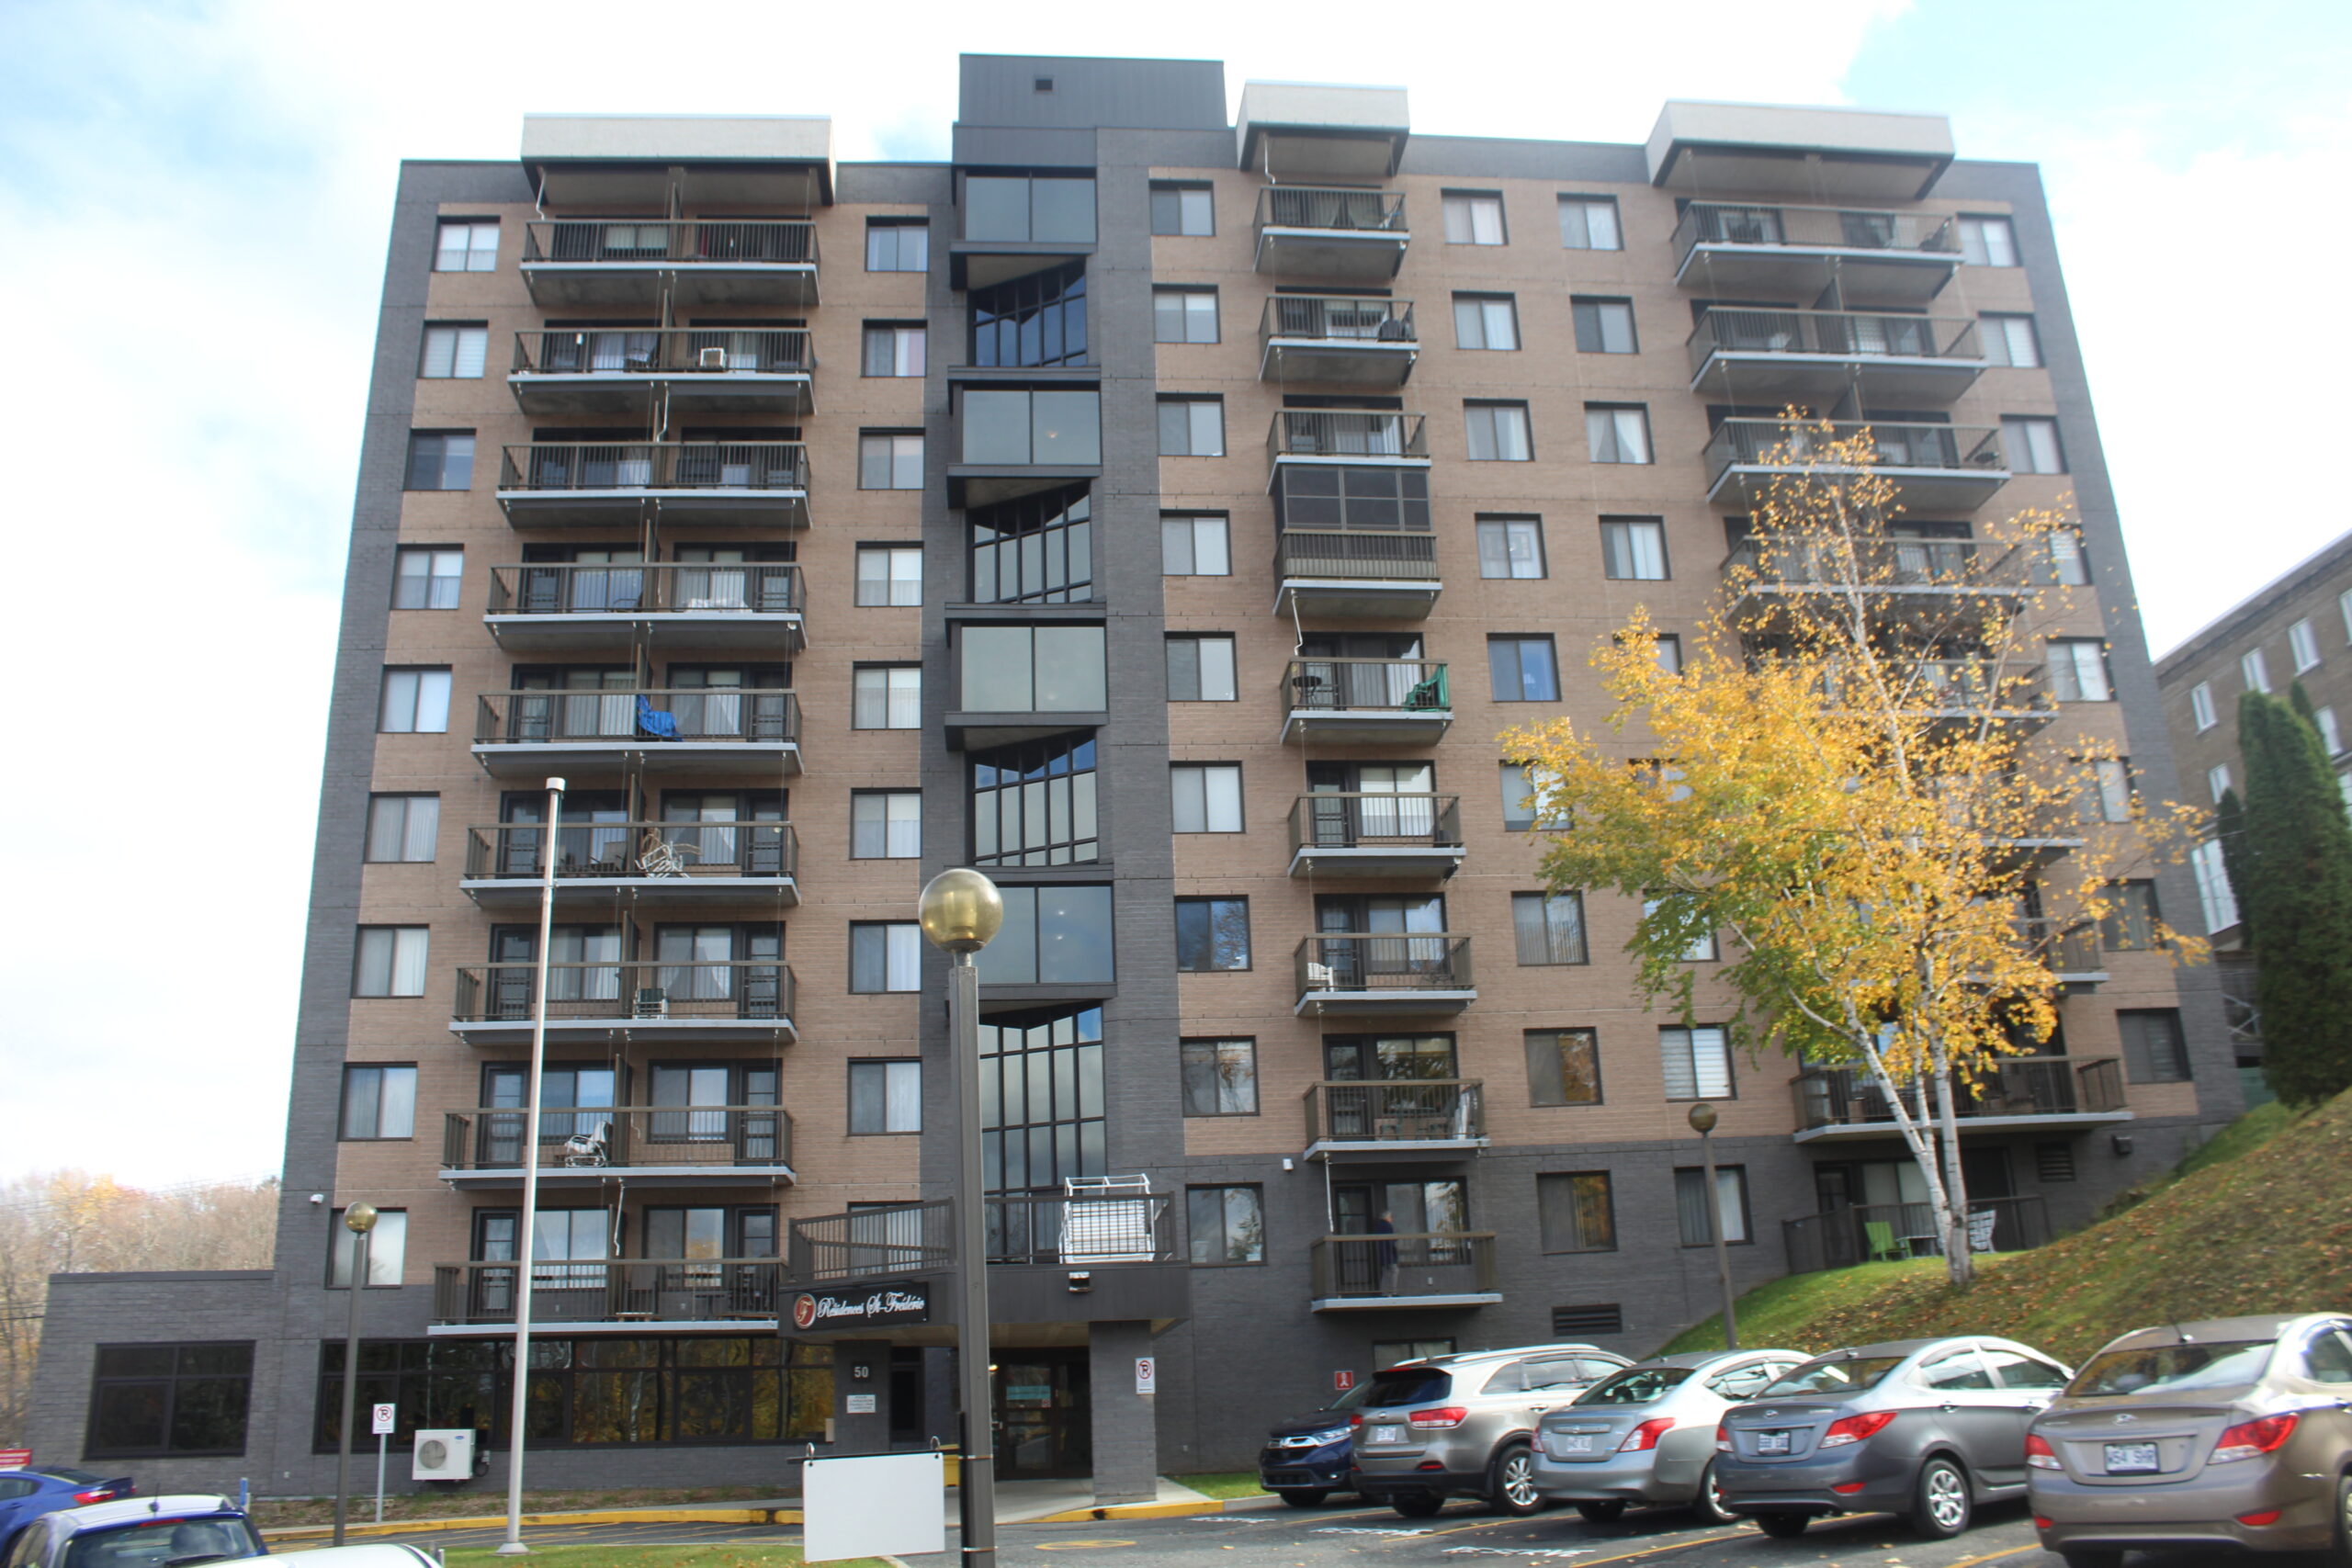 Reserve fund study offered by our experts at Genispec for condominiums in the Greater Montreal Area.